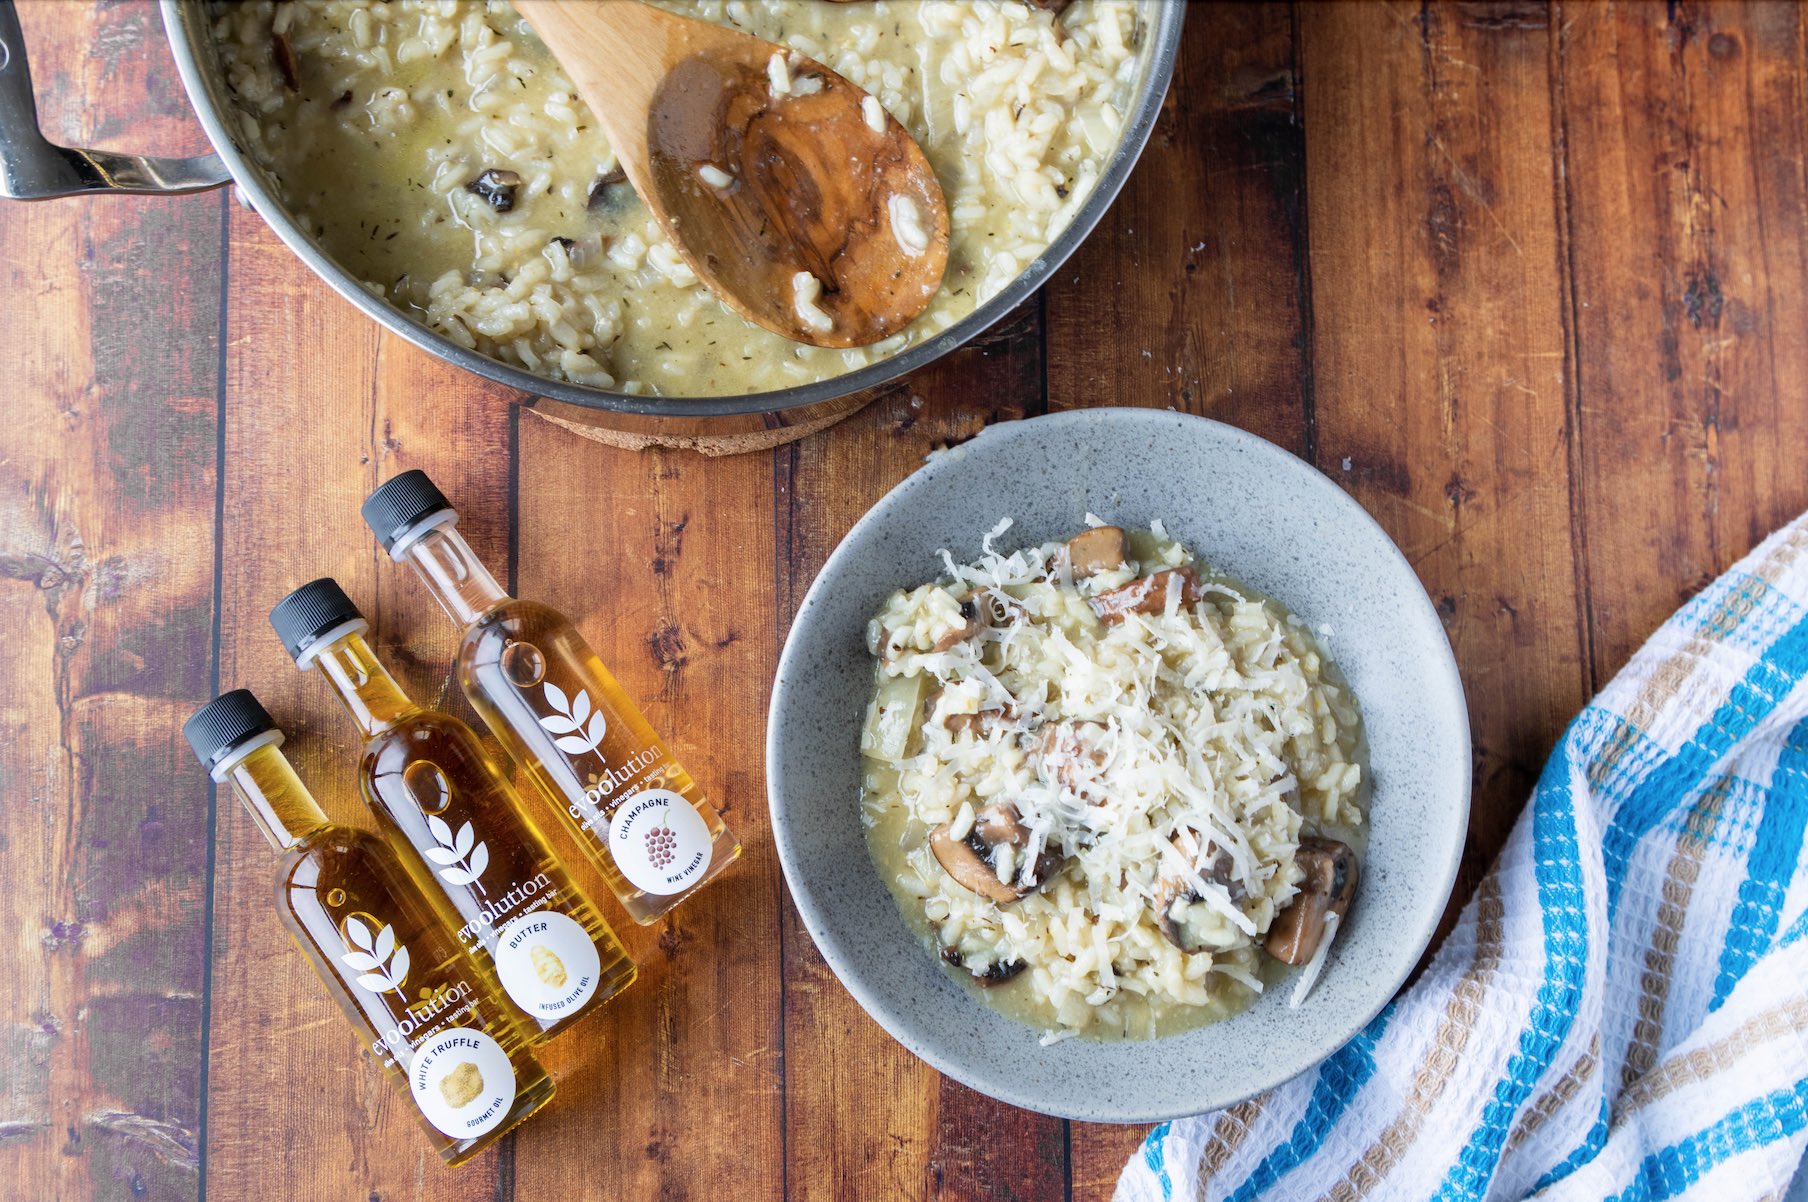 Image of Mushroom Risotto with White Truffle Olive Oil